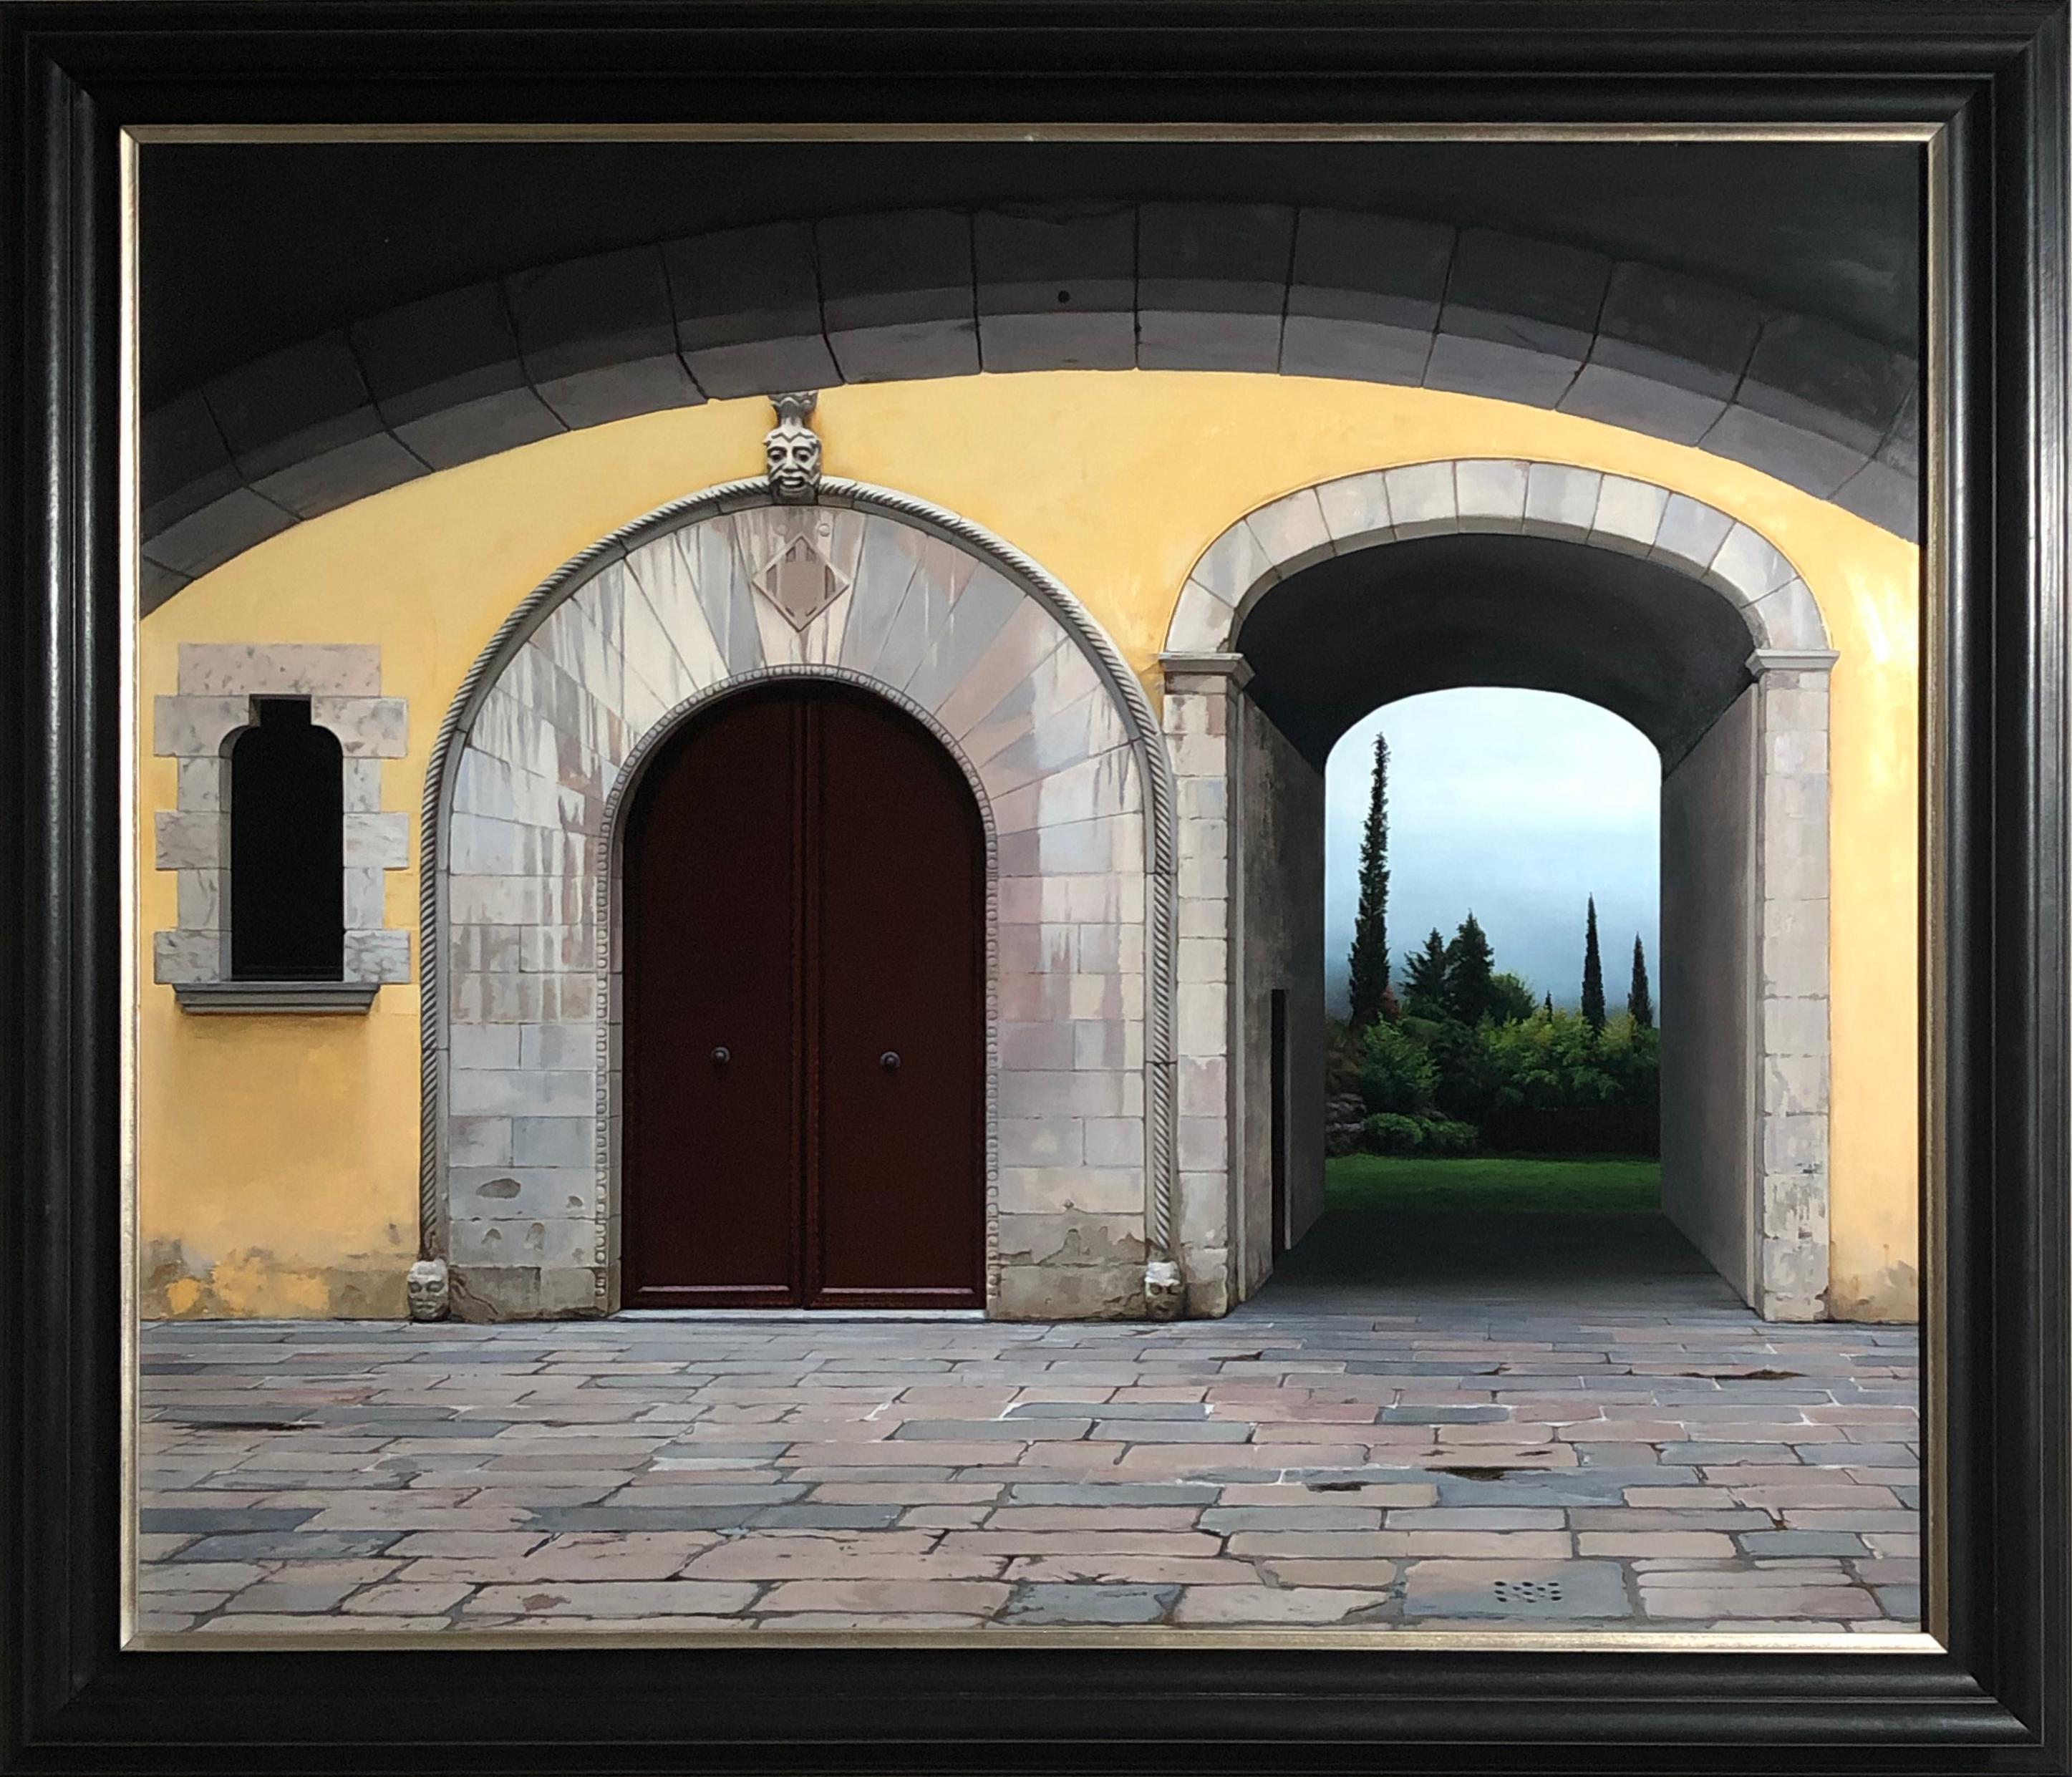 Altered - Medieval Architecture and Arched Doorways Leading to Lush Landscape - Painting by Carol Pylant